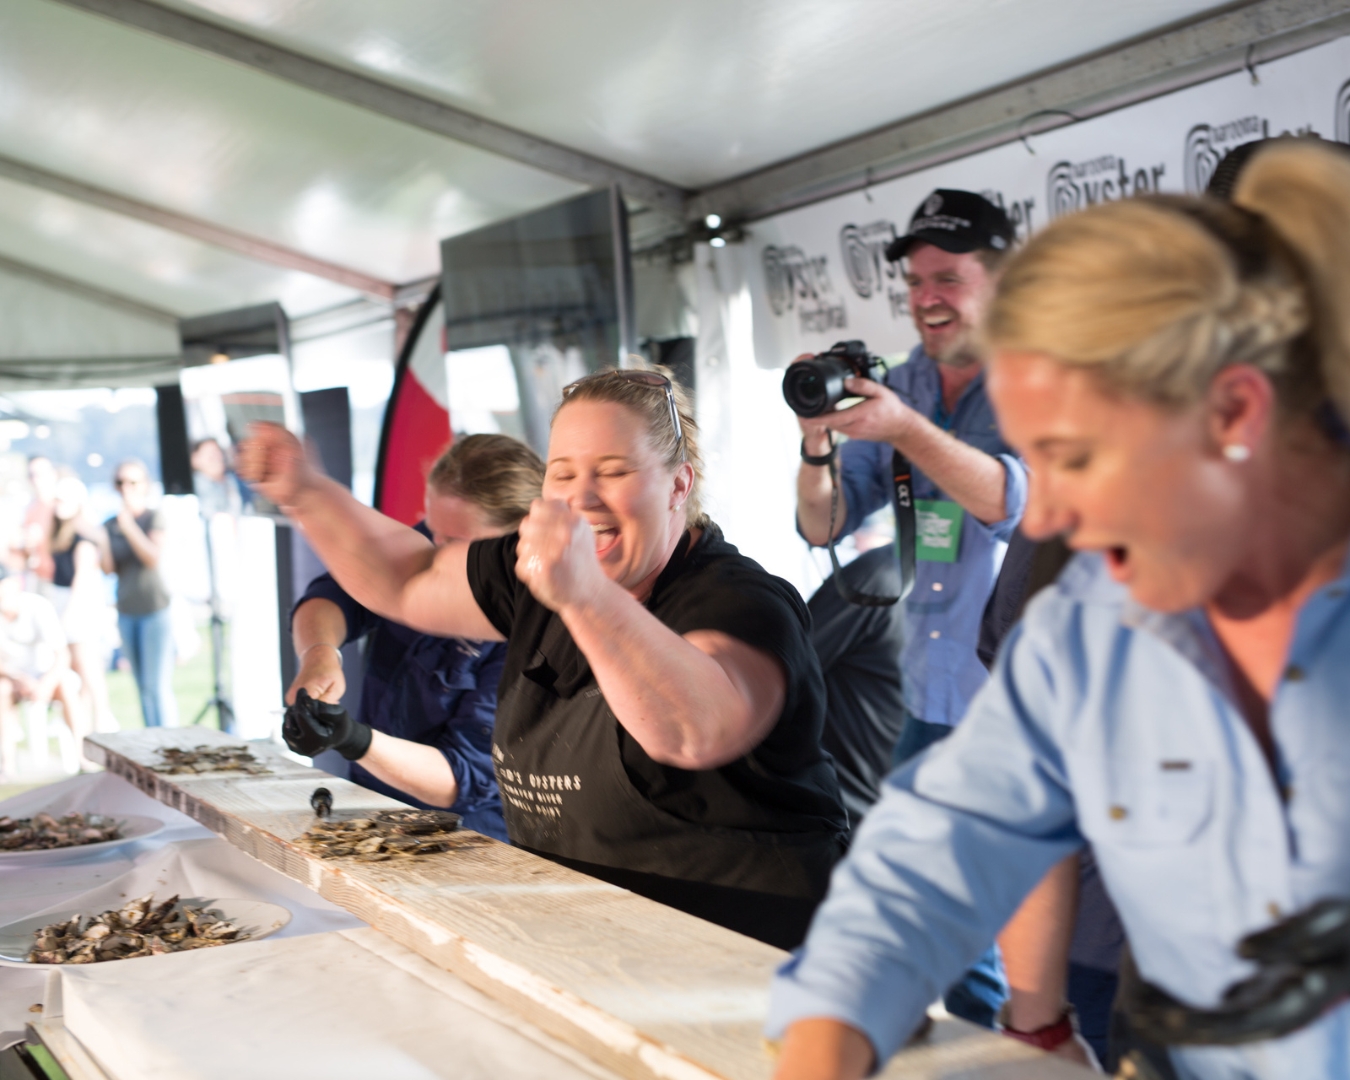 Three women in a race to shuck oysters. The woman in the middle has finished and raised her hands in victory.